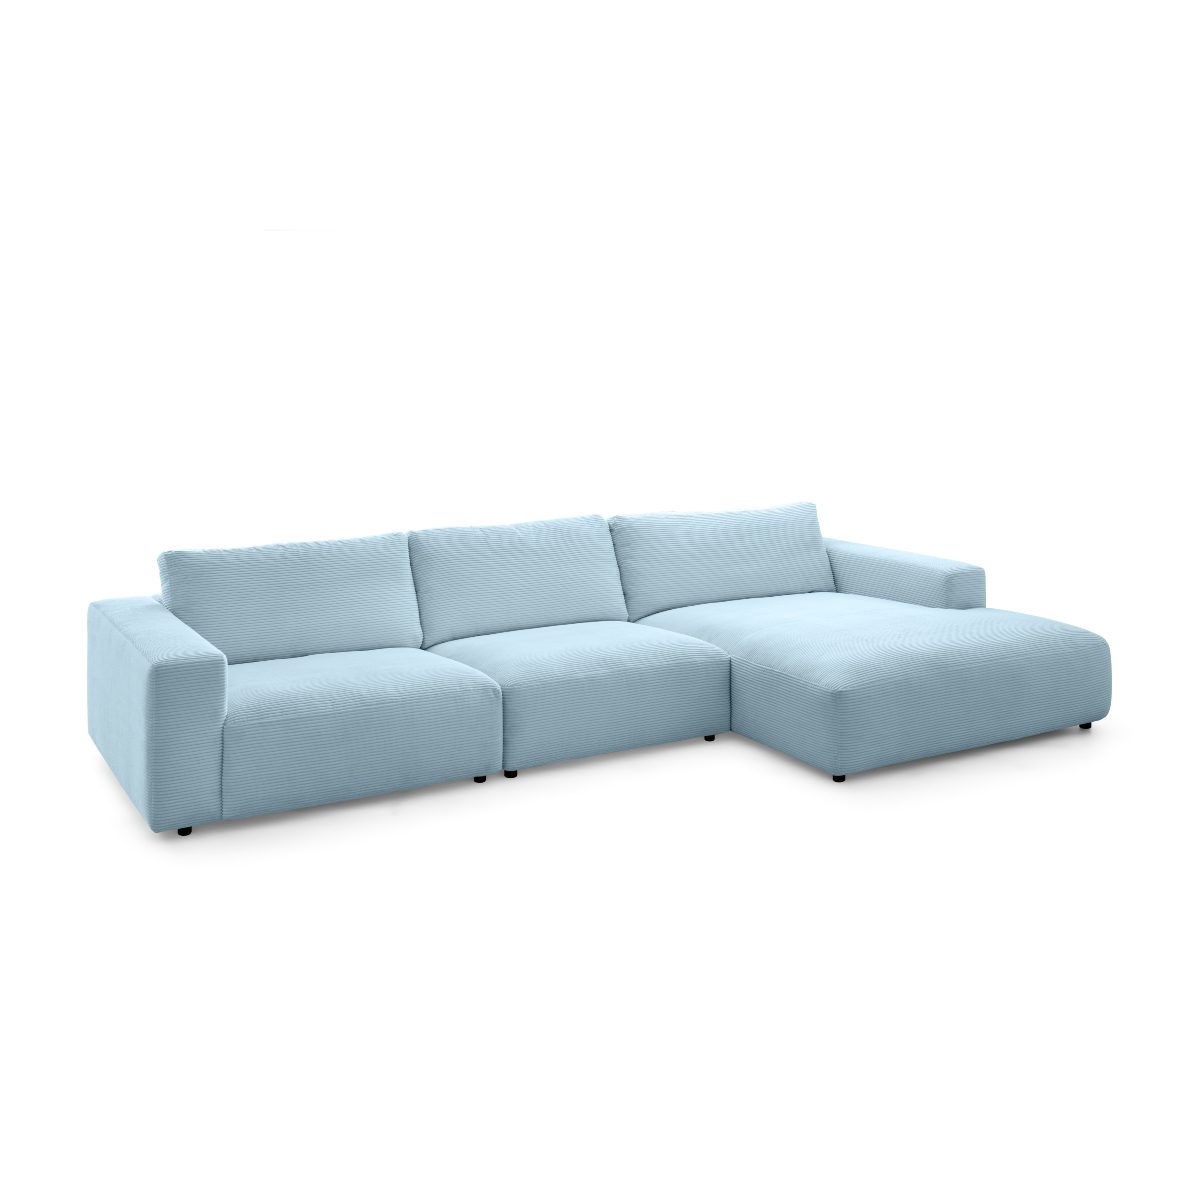 Lucia Musterring Cord M 3,5 Sofa Gallery branded by Sitzer